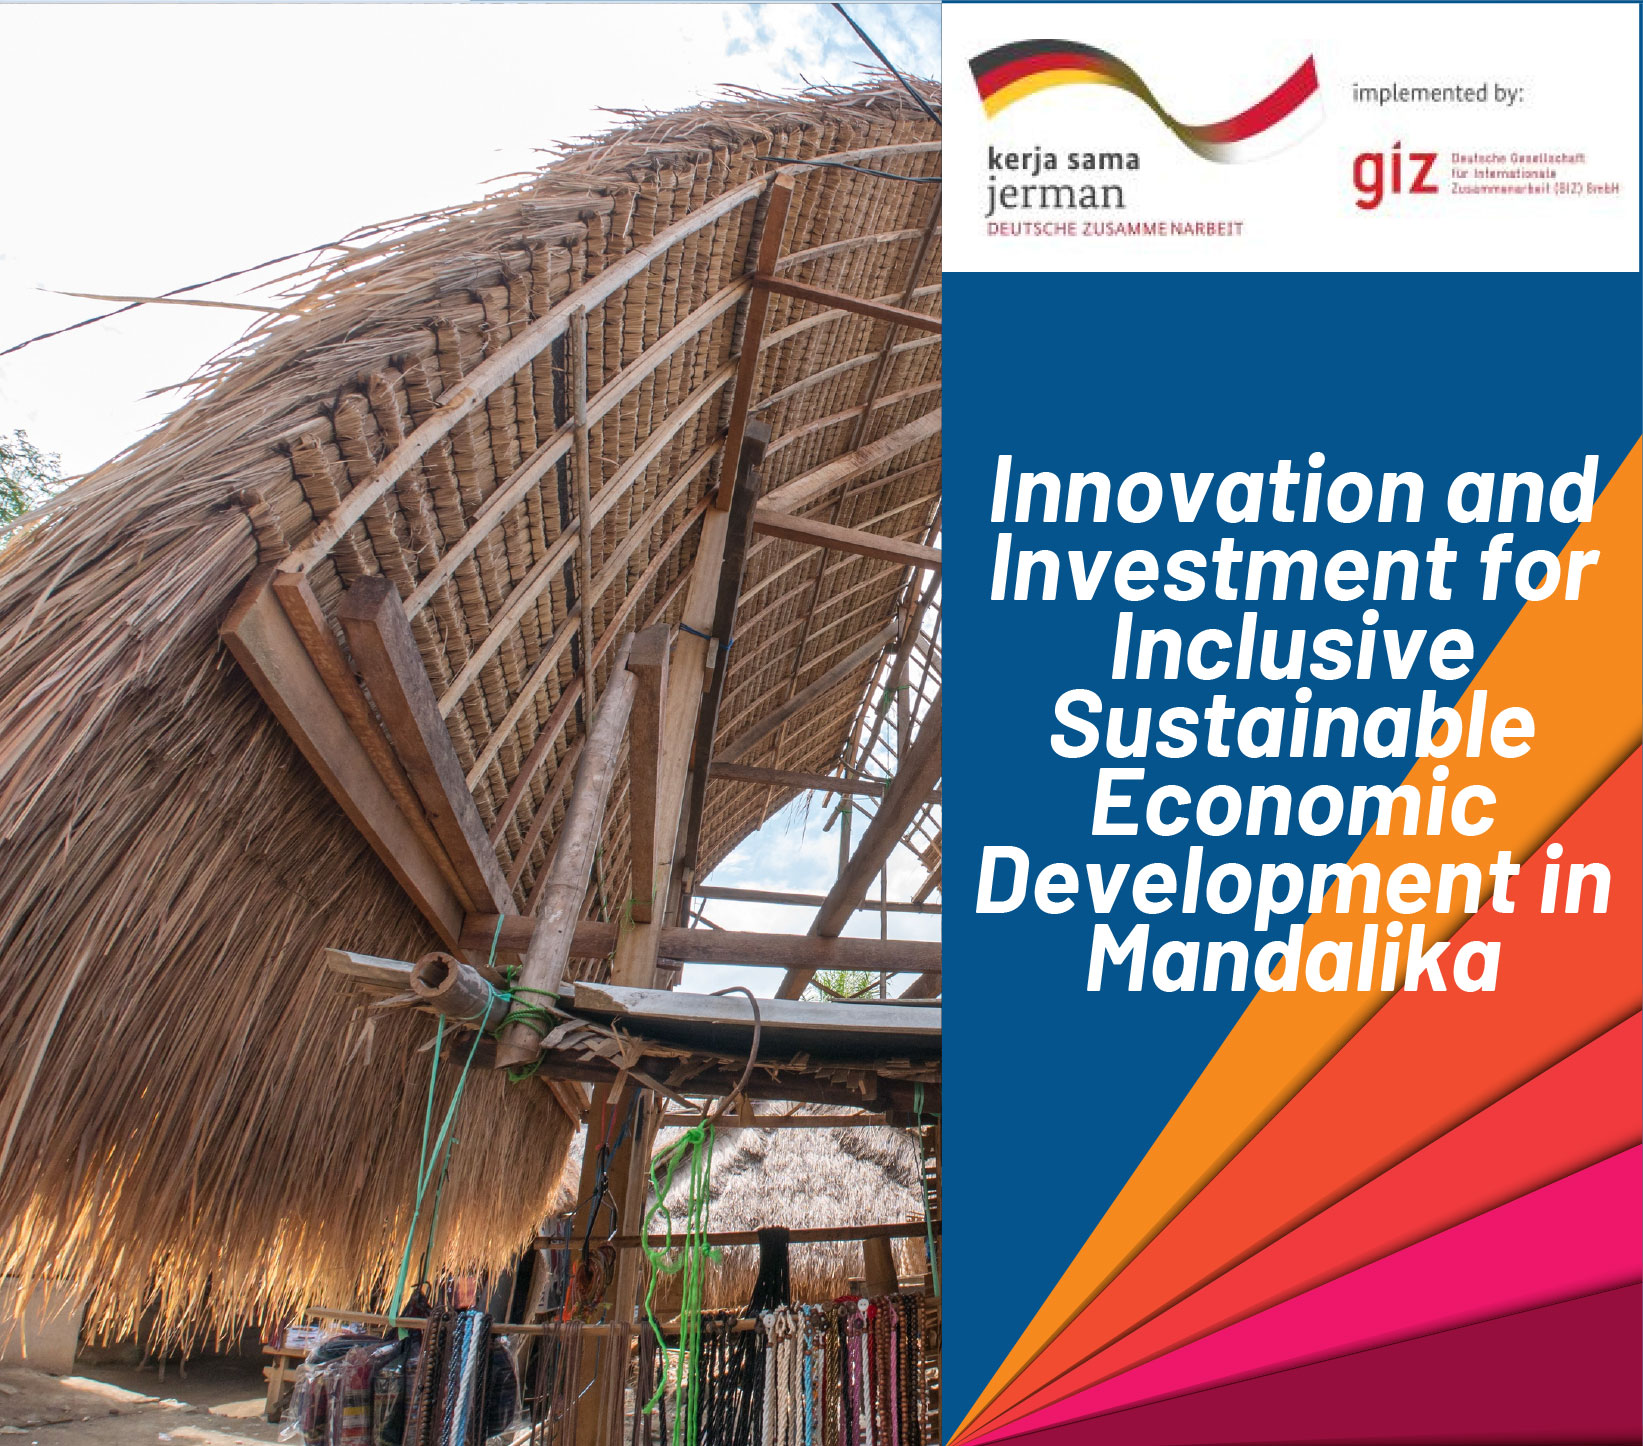 Innovation and Investment for Inclusive Suntainable Economic Development in Mandalika